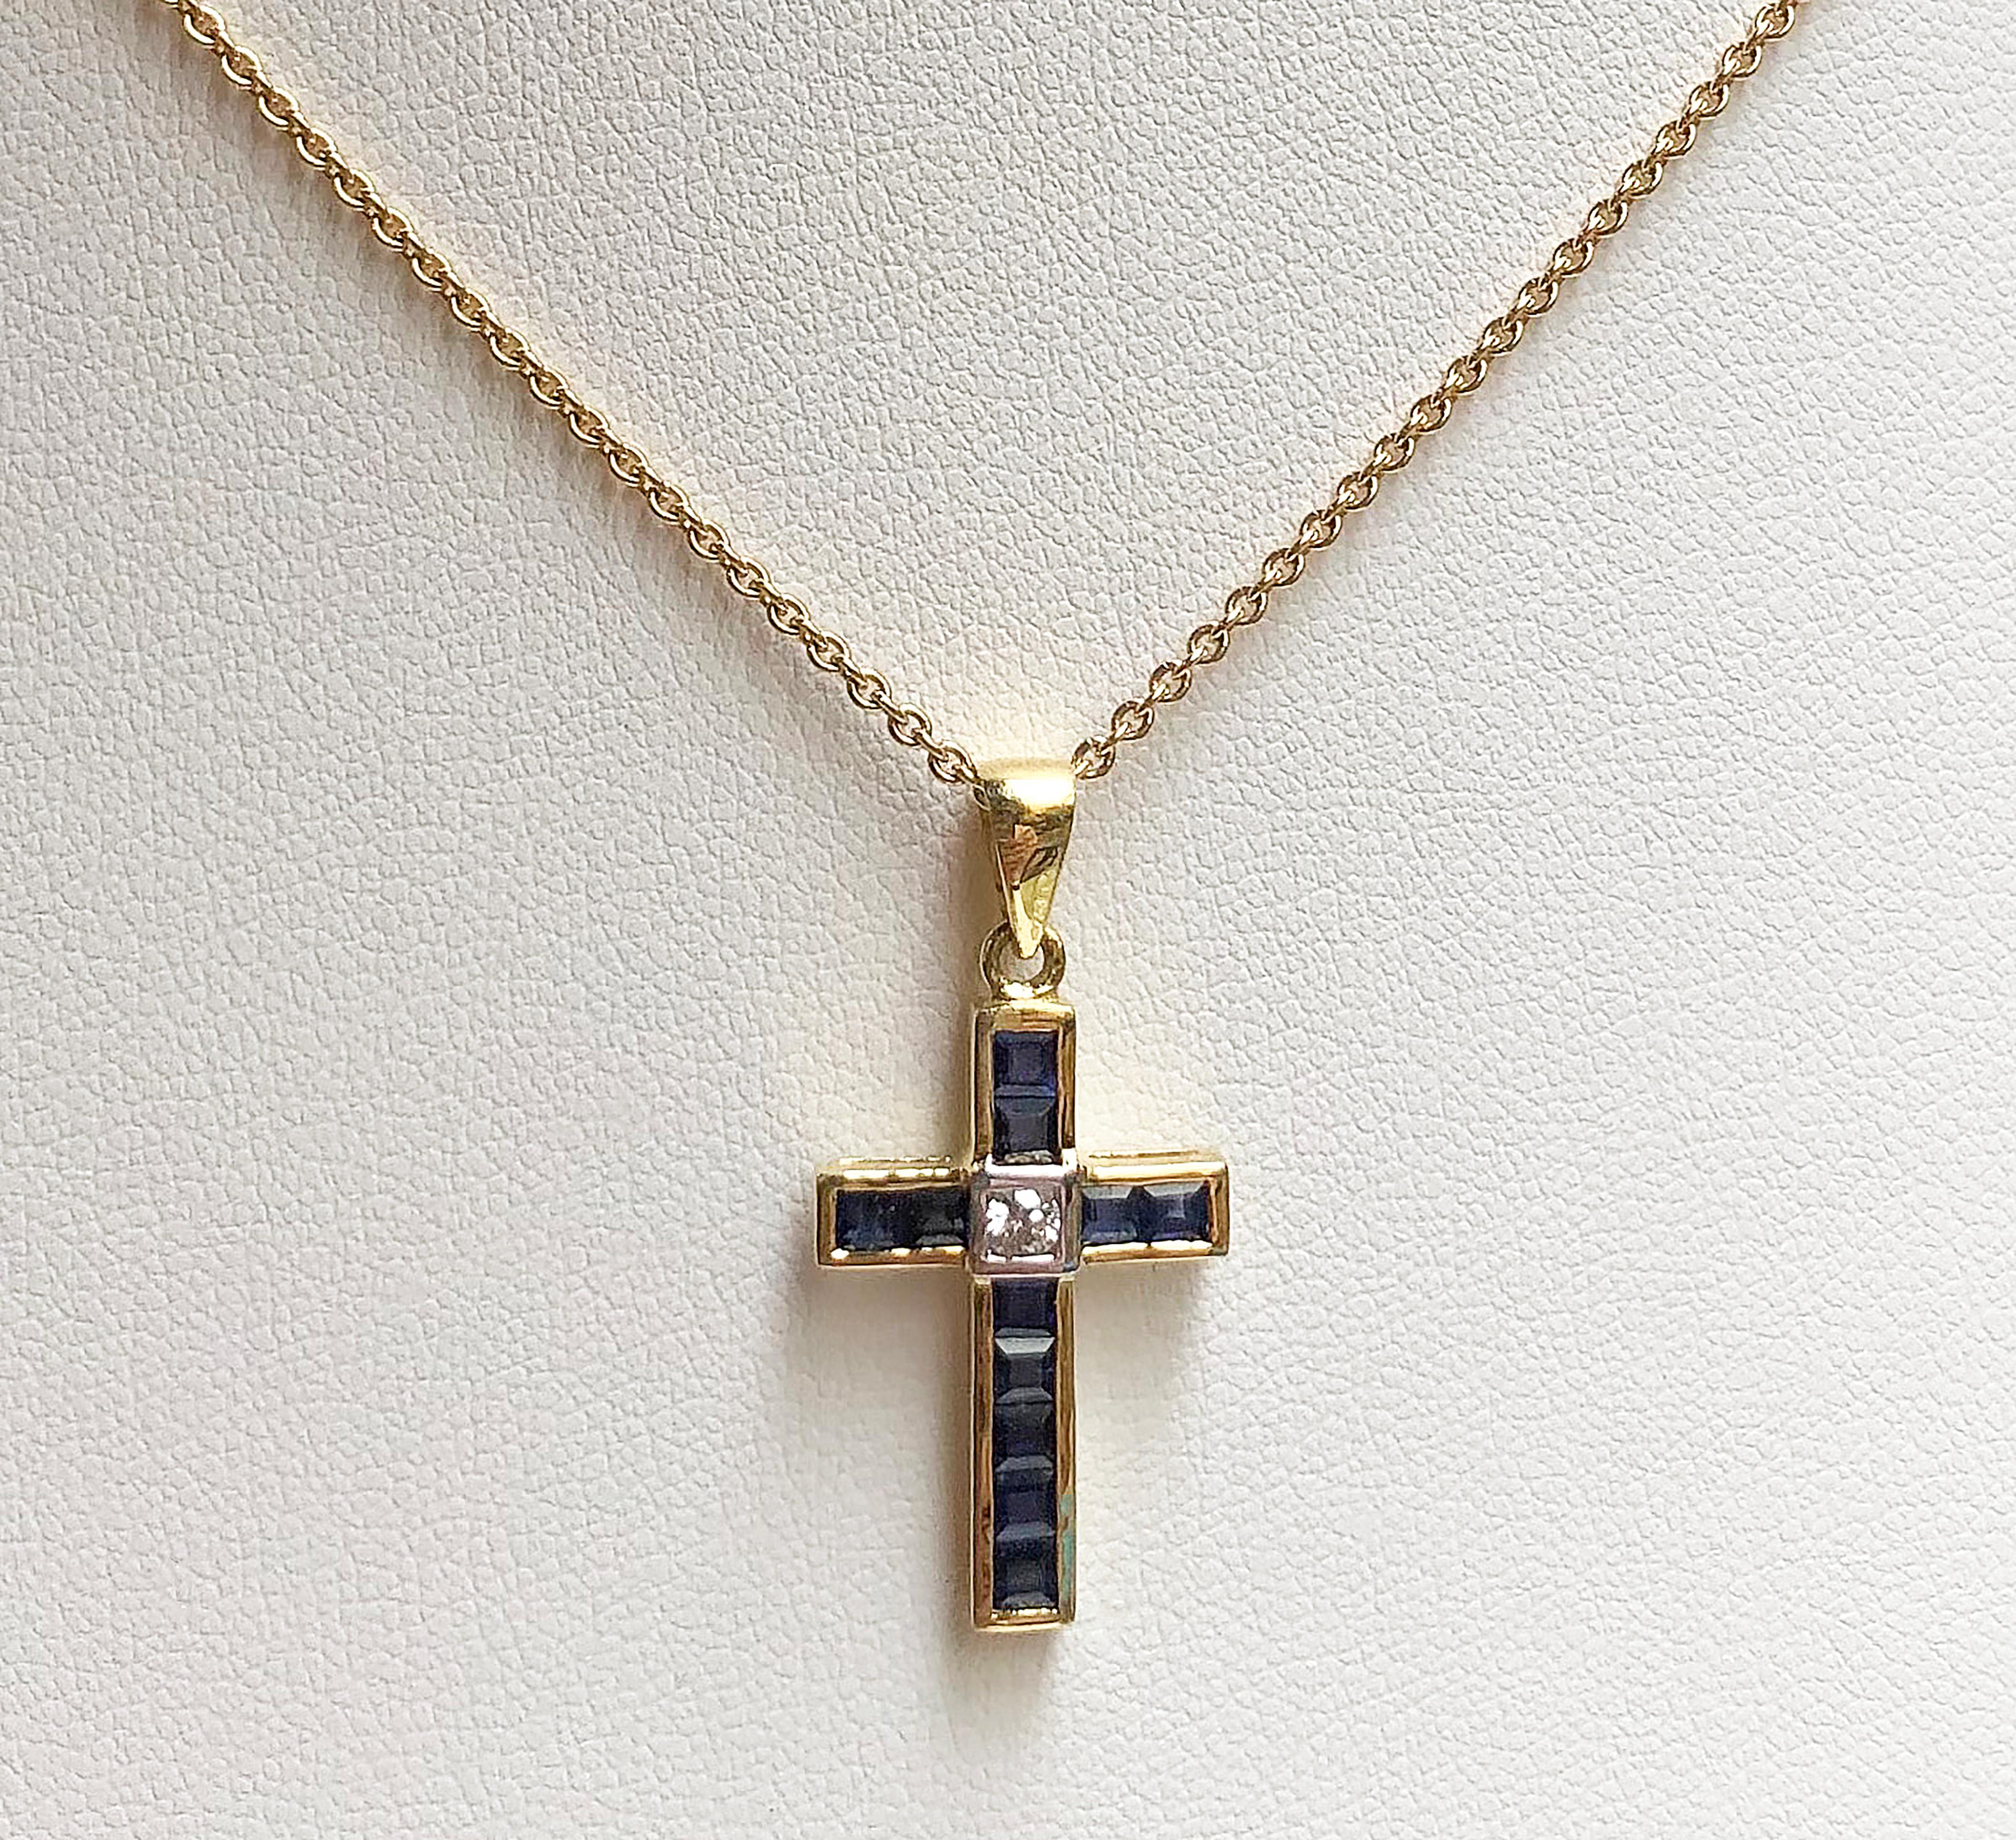 Blue Sapphire 1.23 carats with Diamond 0.07 carat Cross Pendant set in 18 Karat Gold Settings
(chain not included)

Width:  1.5 cm 
Length: 3.0 cm
Total Weight: 2.42 grams

